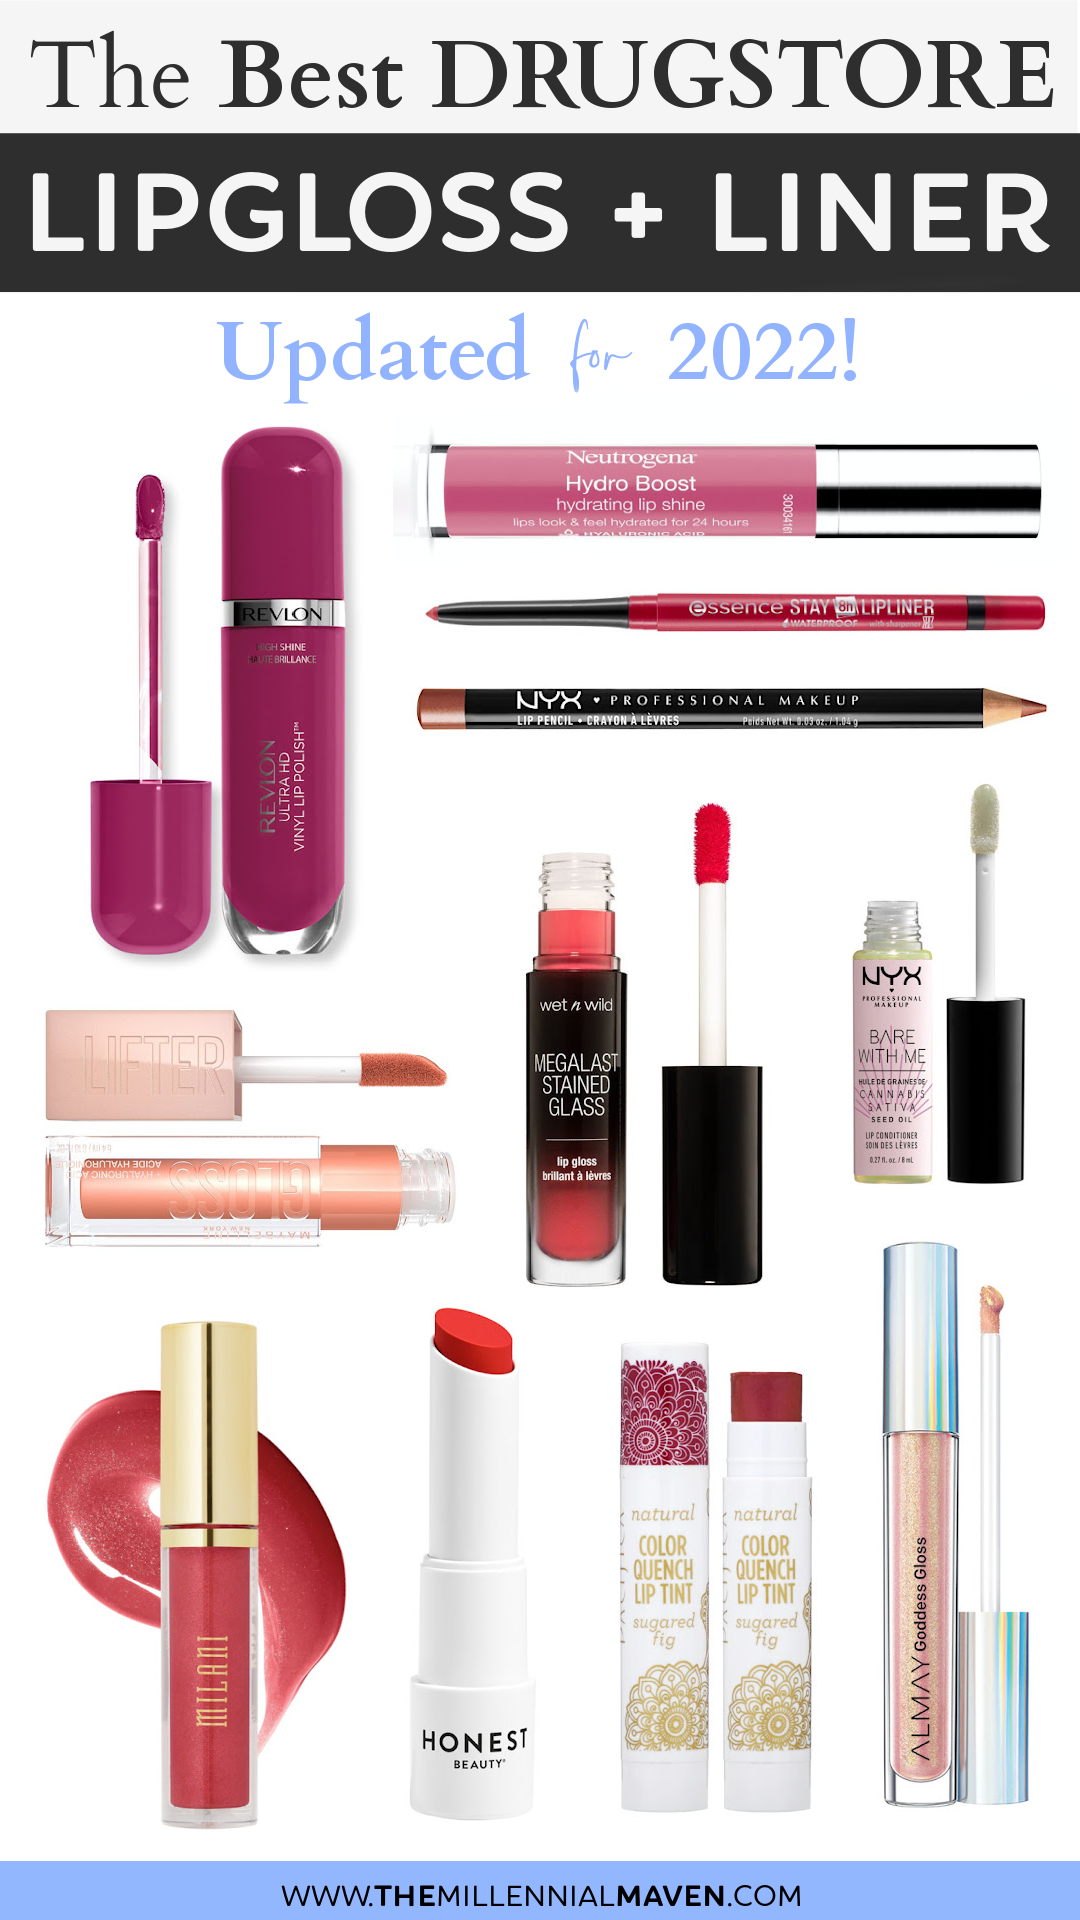 Top 10 Best Lipglosses + Lipliners at the Drugstore in 2022! | Best Drugstore Lipgloss